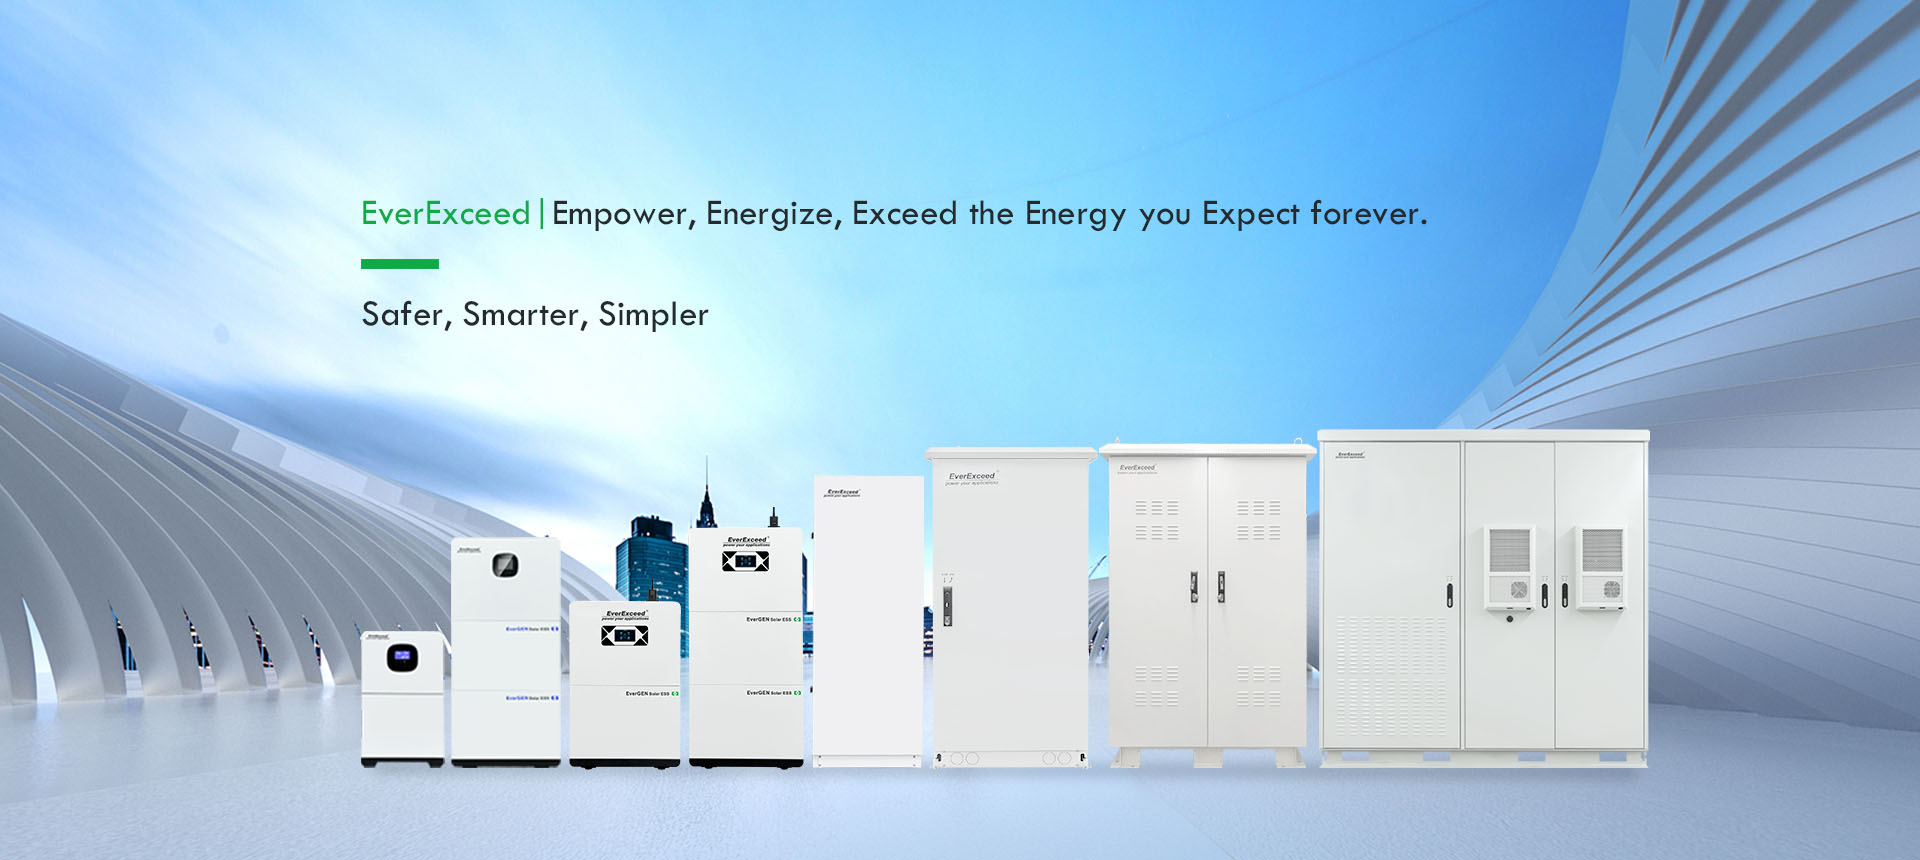 All-in-one Smart Commercial Energy Storage System